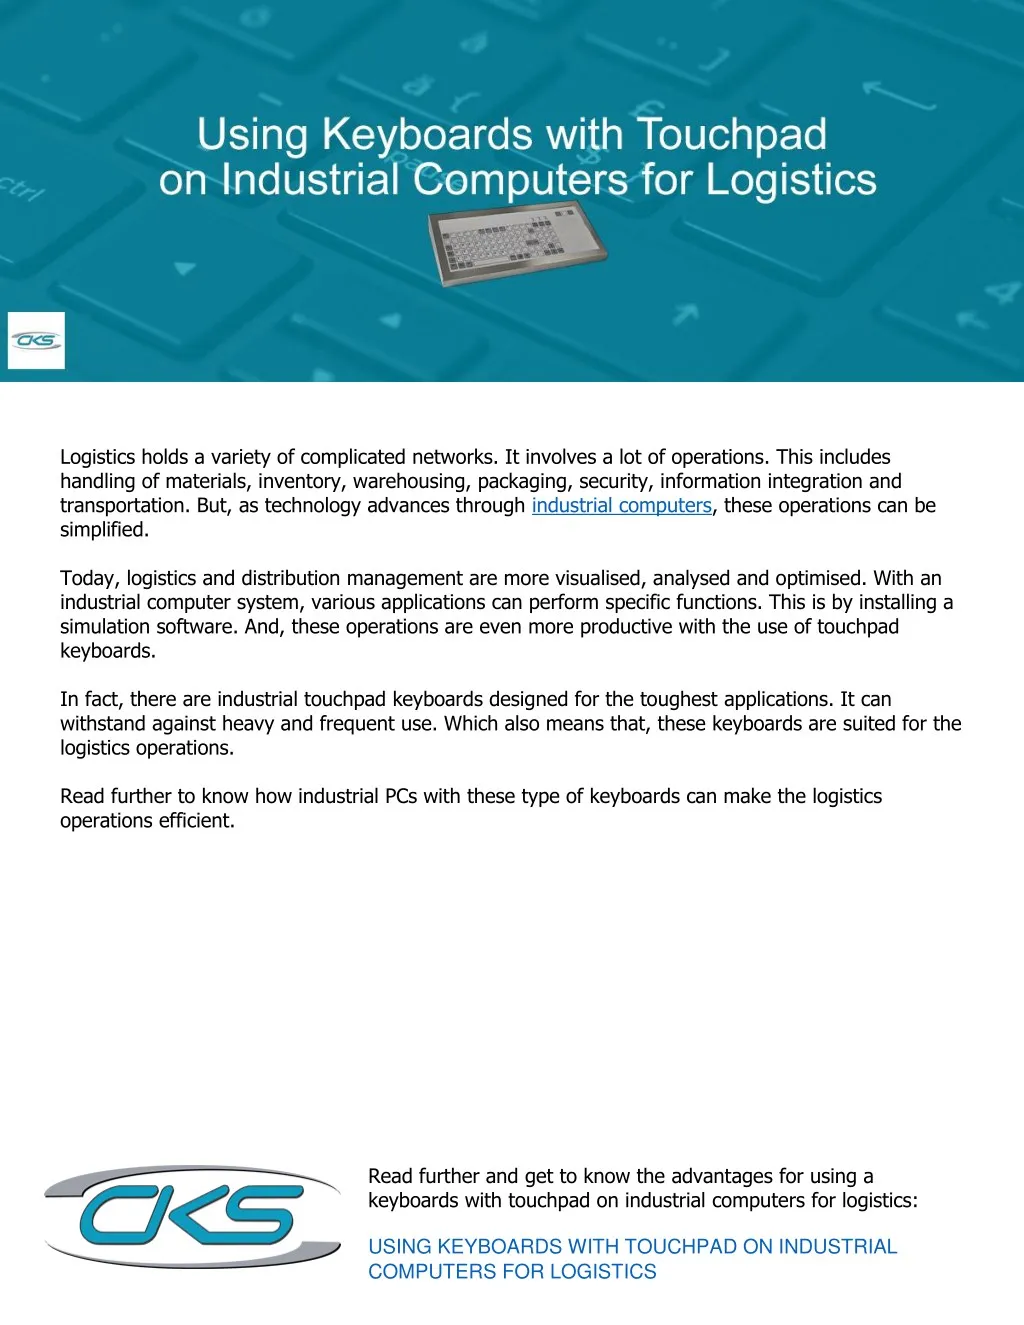 logistics holds a variety of complicated networks